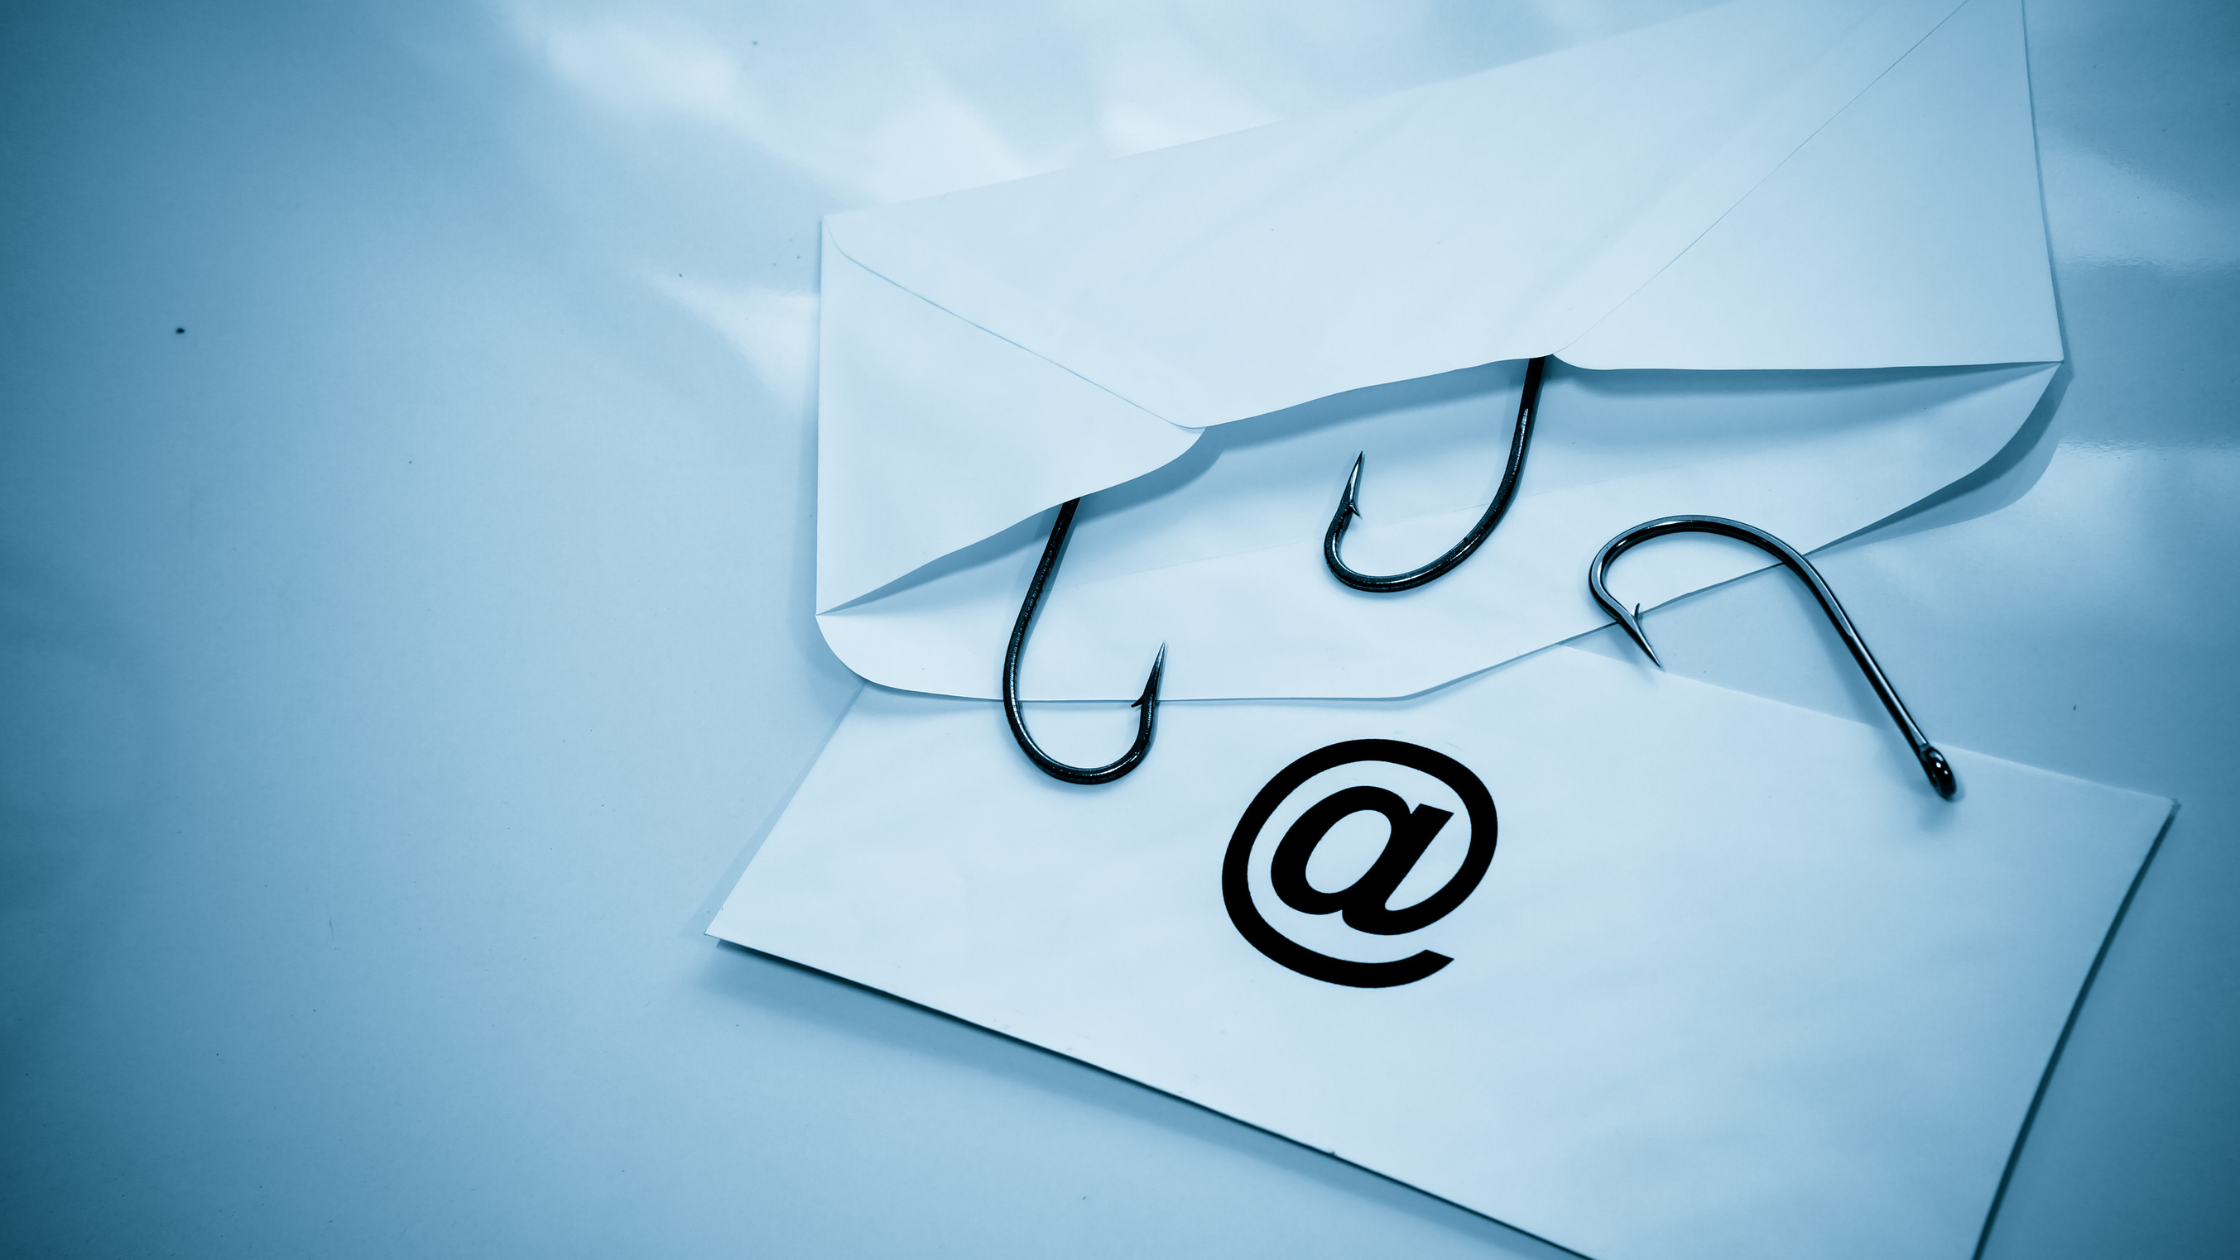 Secure your Small business from phishing emails with these 5 tips